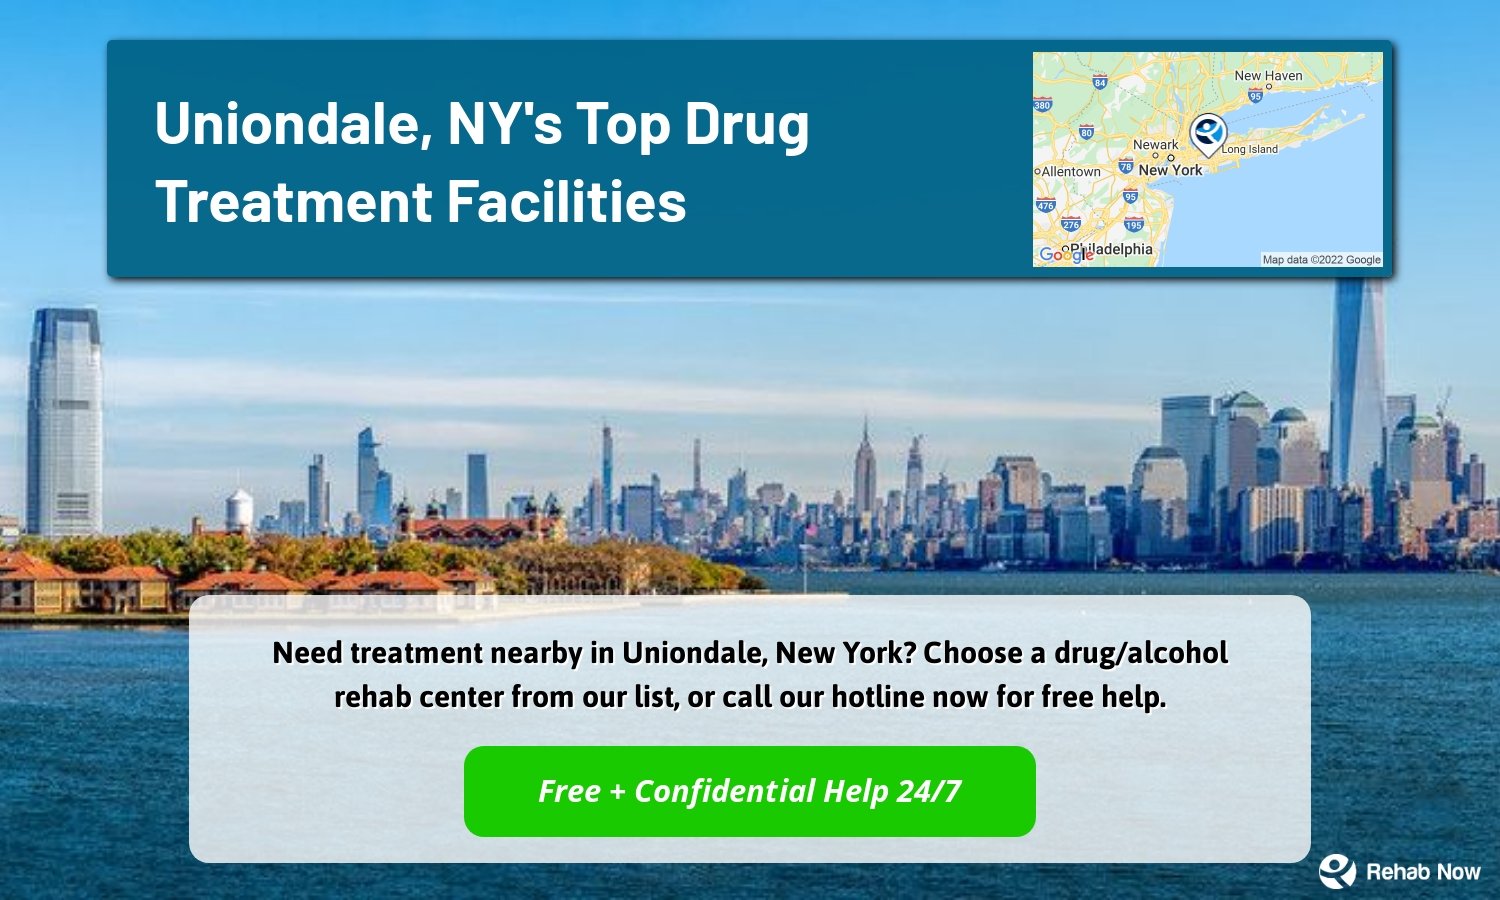 Need treatment nearby in Uniondale, New York? Choose a drug/alcohol rehab center from our list, or call our hotline now for free help.